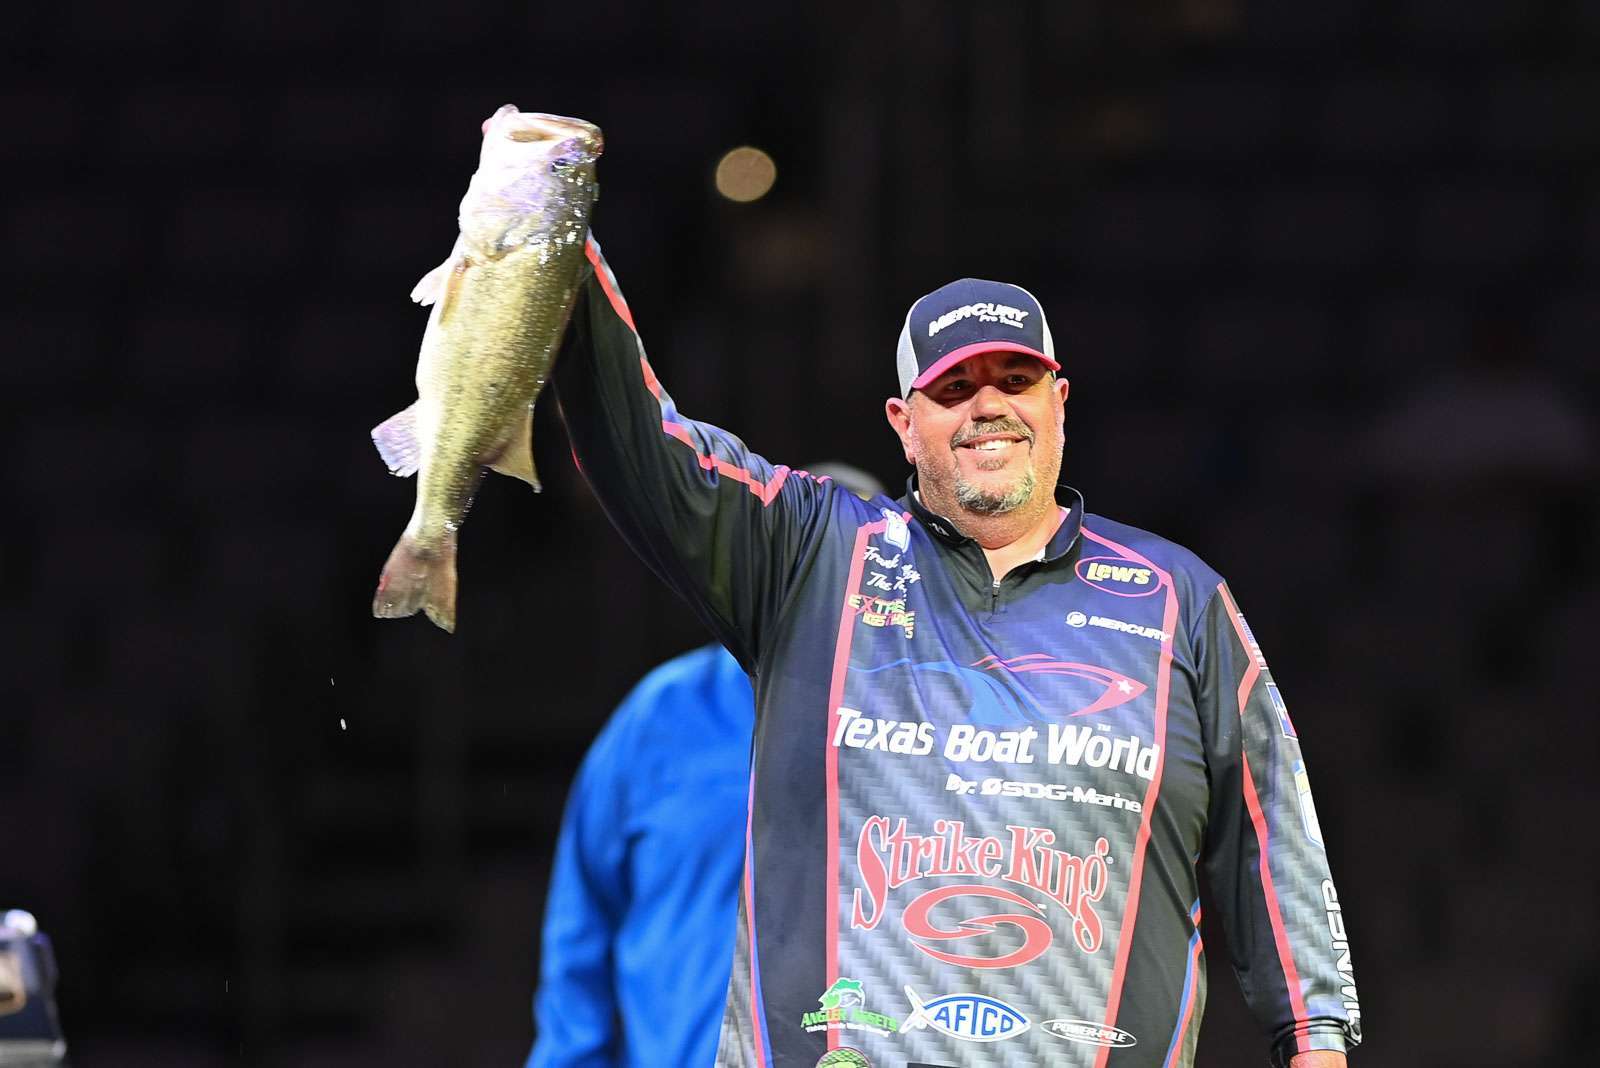 Big bass live in Lake Ray Roberts and big bass were caught. Many of them made a big difference in the Academy Sports + Outdoors Bassmaster Classic presented by Huk. Frank Talley of Temple, Texas, said he got super excited when he leaned back on the 8-3 bass that bit from bushes in three feet of water. âTo do it in the Classic is exhilarating. I mean, in the first hour of the first day, it don't get any better than that,â he said. Talleyâs bass held up all three days of competition to win the $2,500 Berkley Big Bass bonus. 